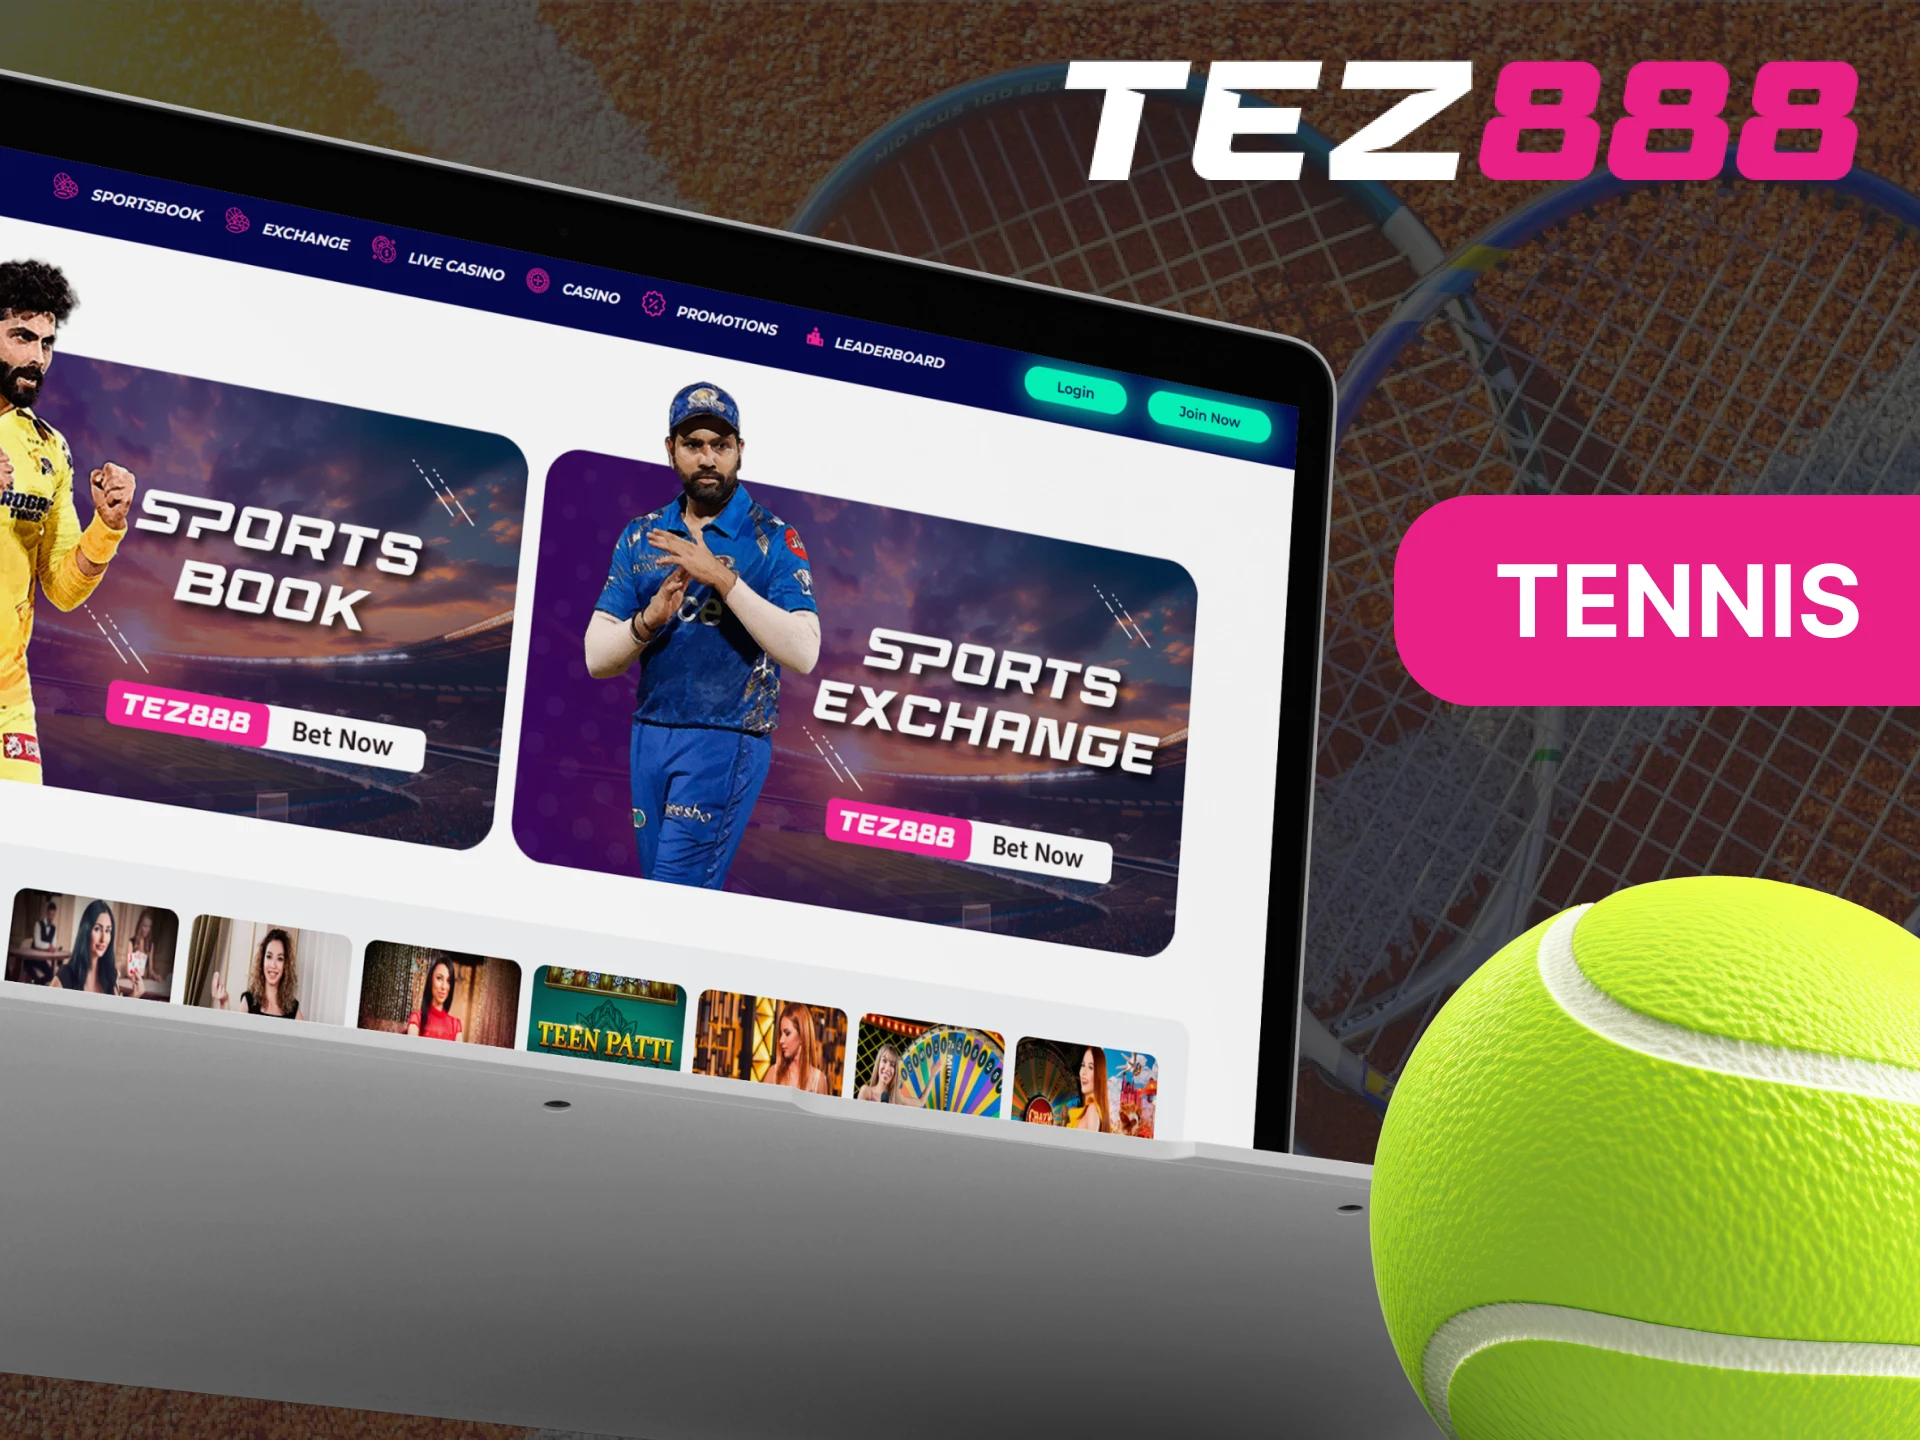 Try betting on tennis at Tez888 casino.